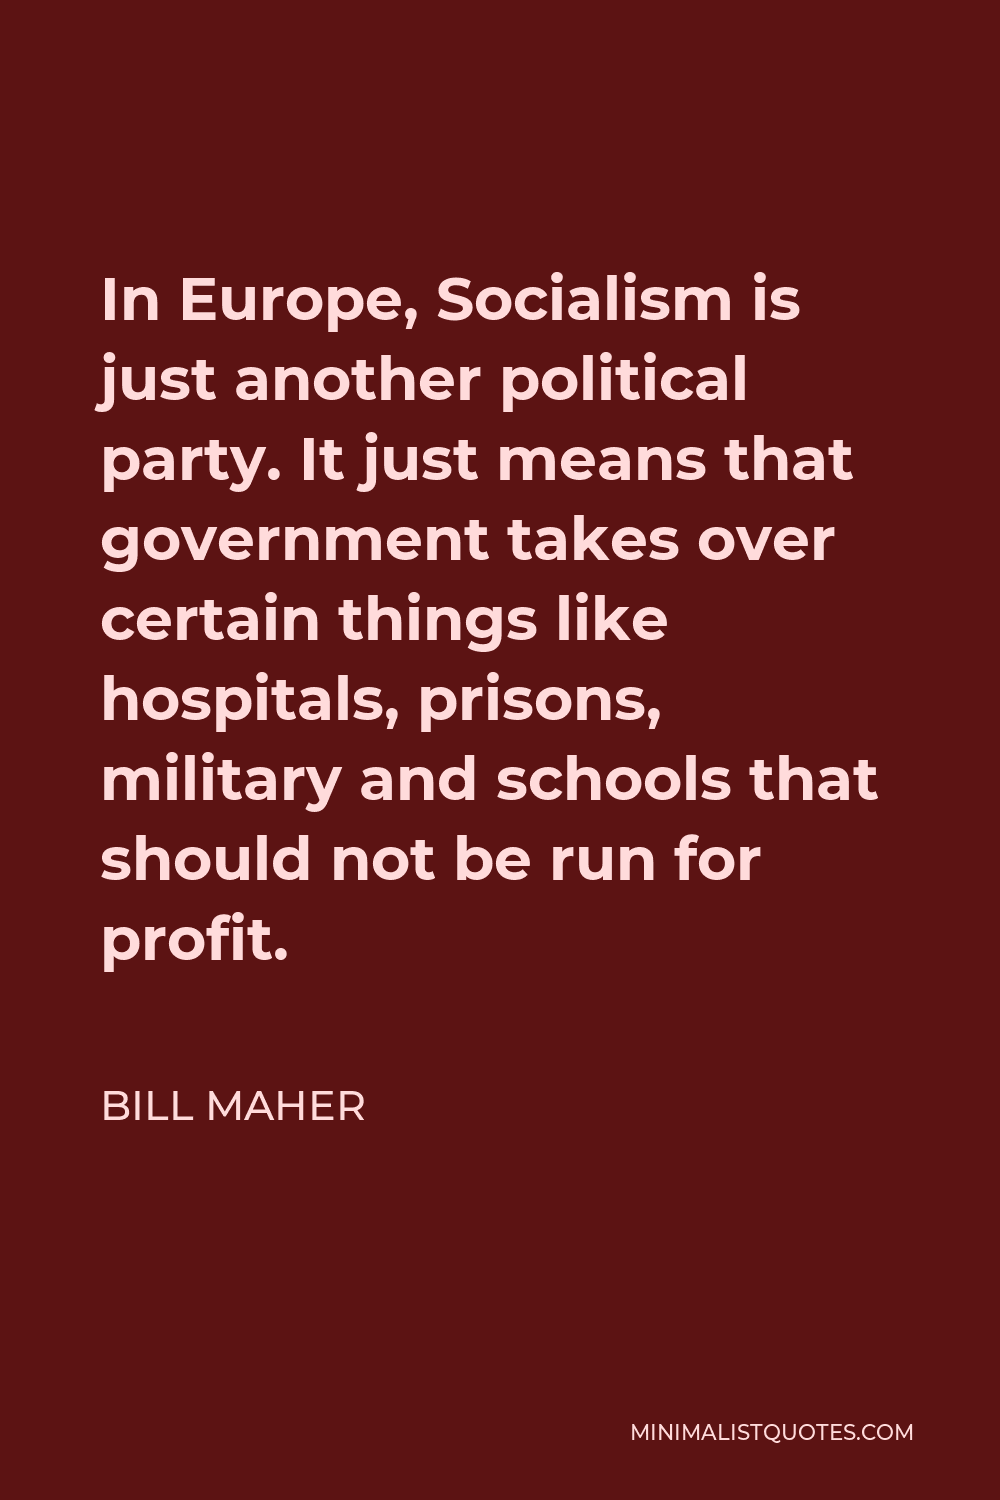 Bill Maher Quote - In Europe, Socialism is just another political party. It just means that government takes over certain things like hospitals, prisons, military and schools that should not be run for profit.